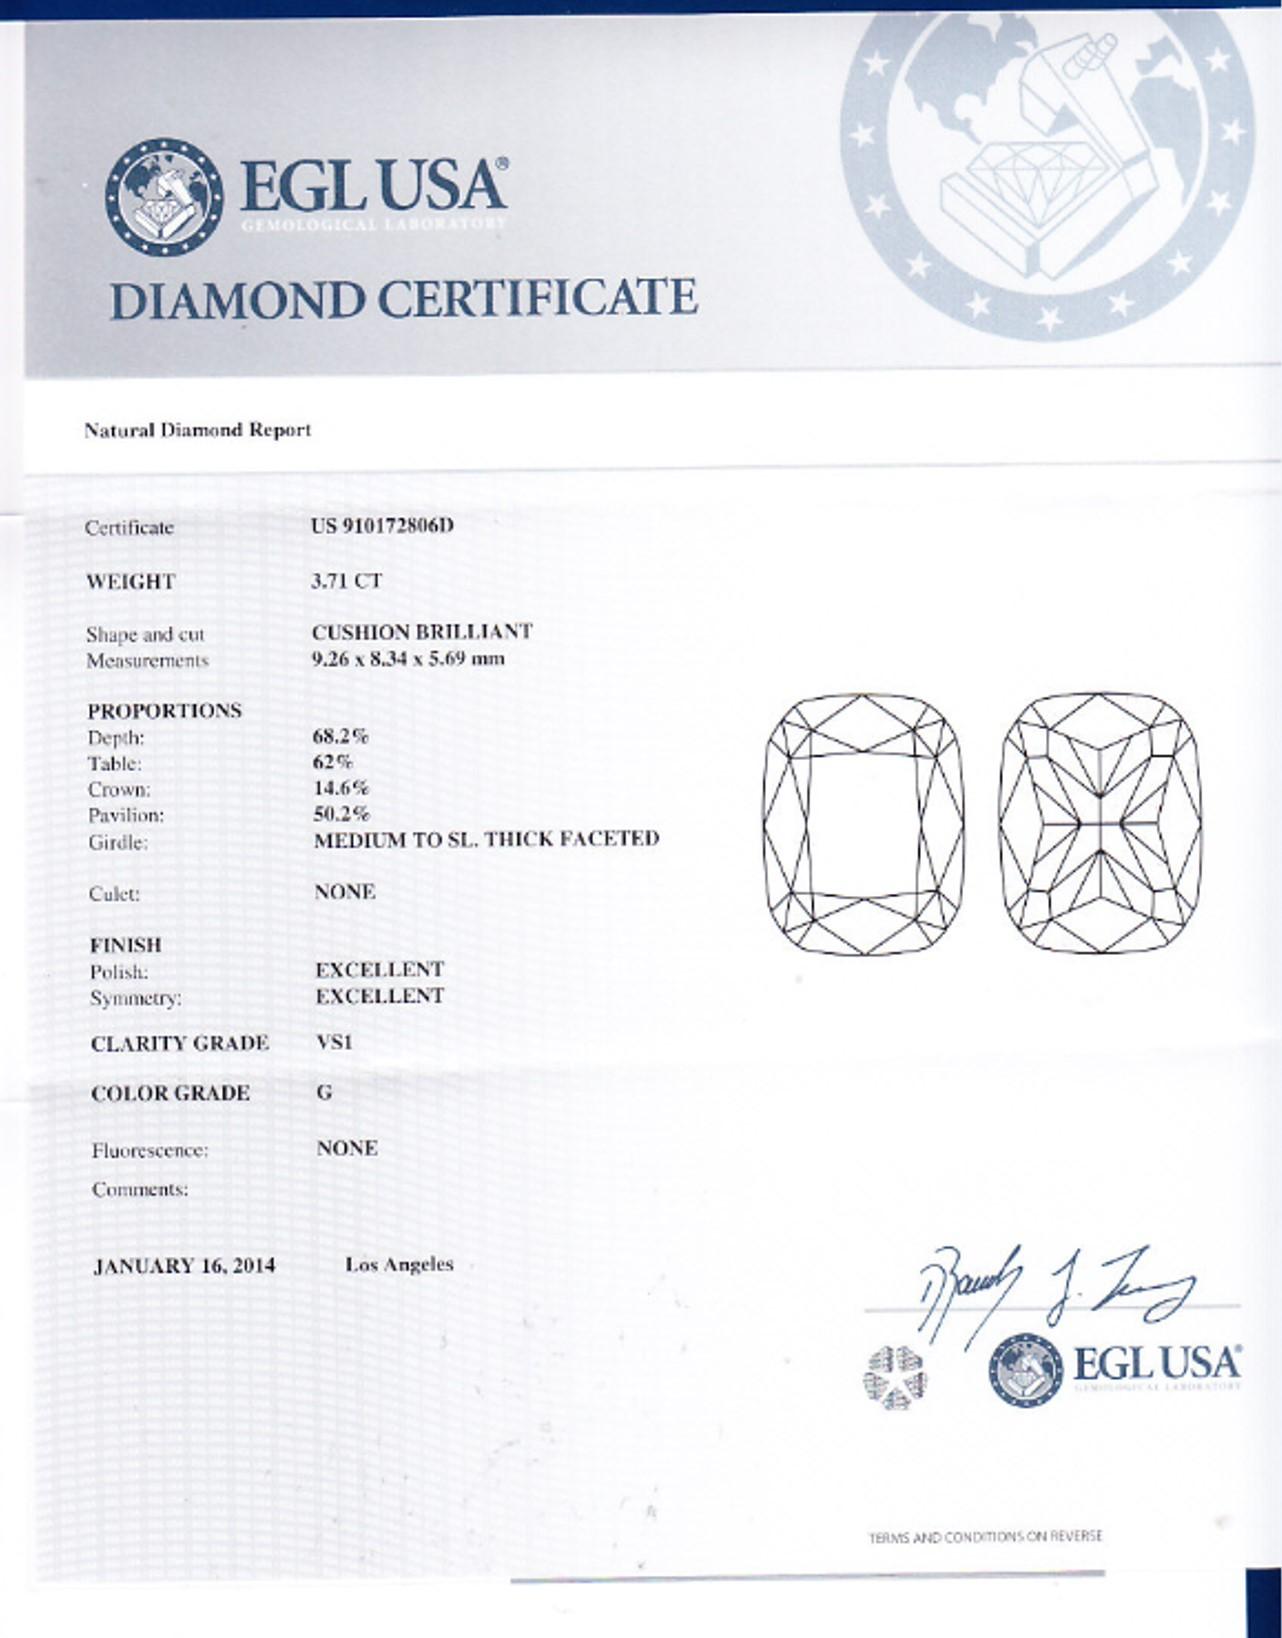 Incredible Deal on EGLUSA Certified 3.71 Carat Cushion Cut, G color, VS1 Clarity , Diamond Ring, measuring 9.26-8.34x5.69. EGLUSA Certificate #910172806D
Total Carat weight on the ring is 5.31.
This contemporary mounting fits this Beautiful large